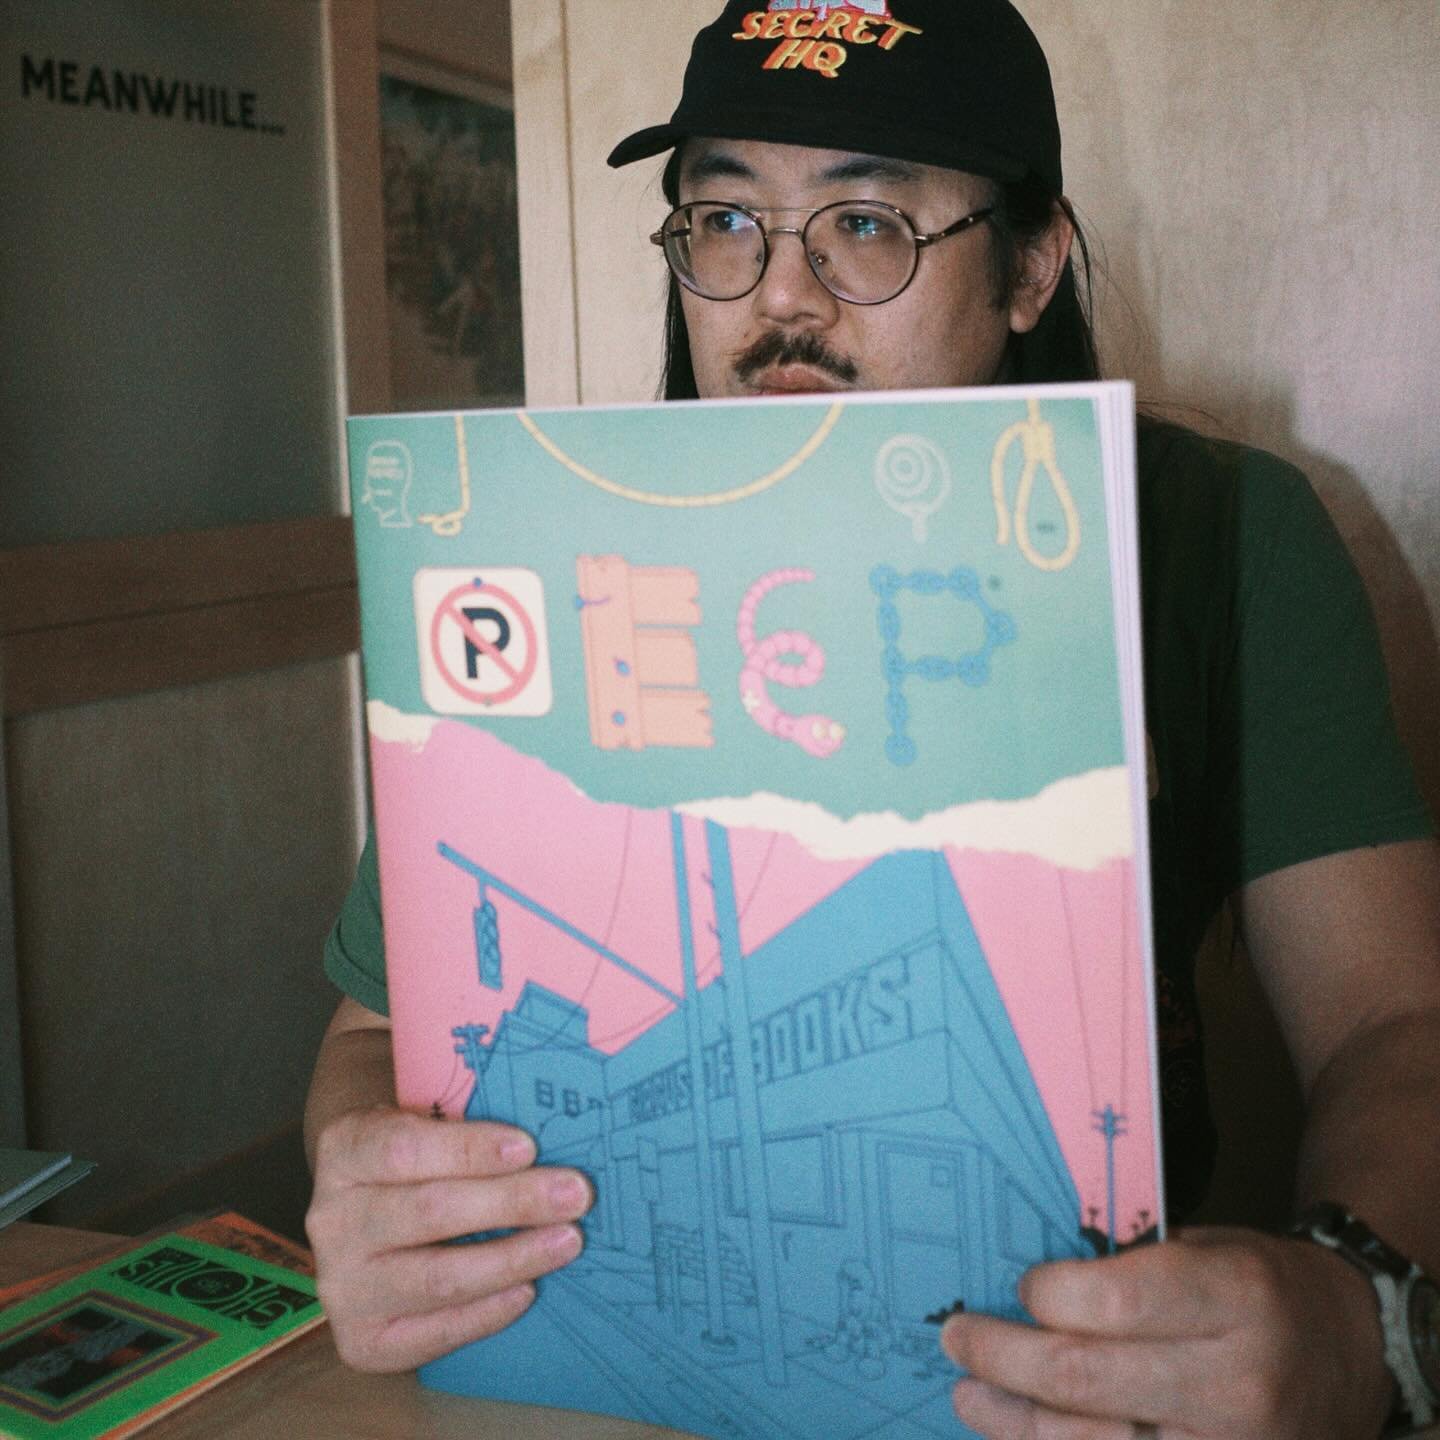 PEEP is a brand new @wearebraindead comics anthology releasing worldwide on May 10th! 

Peep&nbsp;features brilliant established creators like Art Spiegelman (Maus) and Kevin Huizenga (Ganges), as well as exciting newer voices like Sophia Foster-Dimi